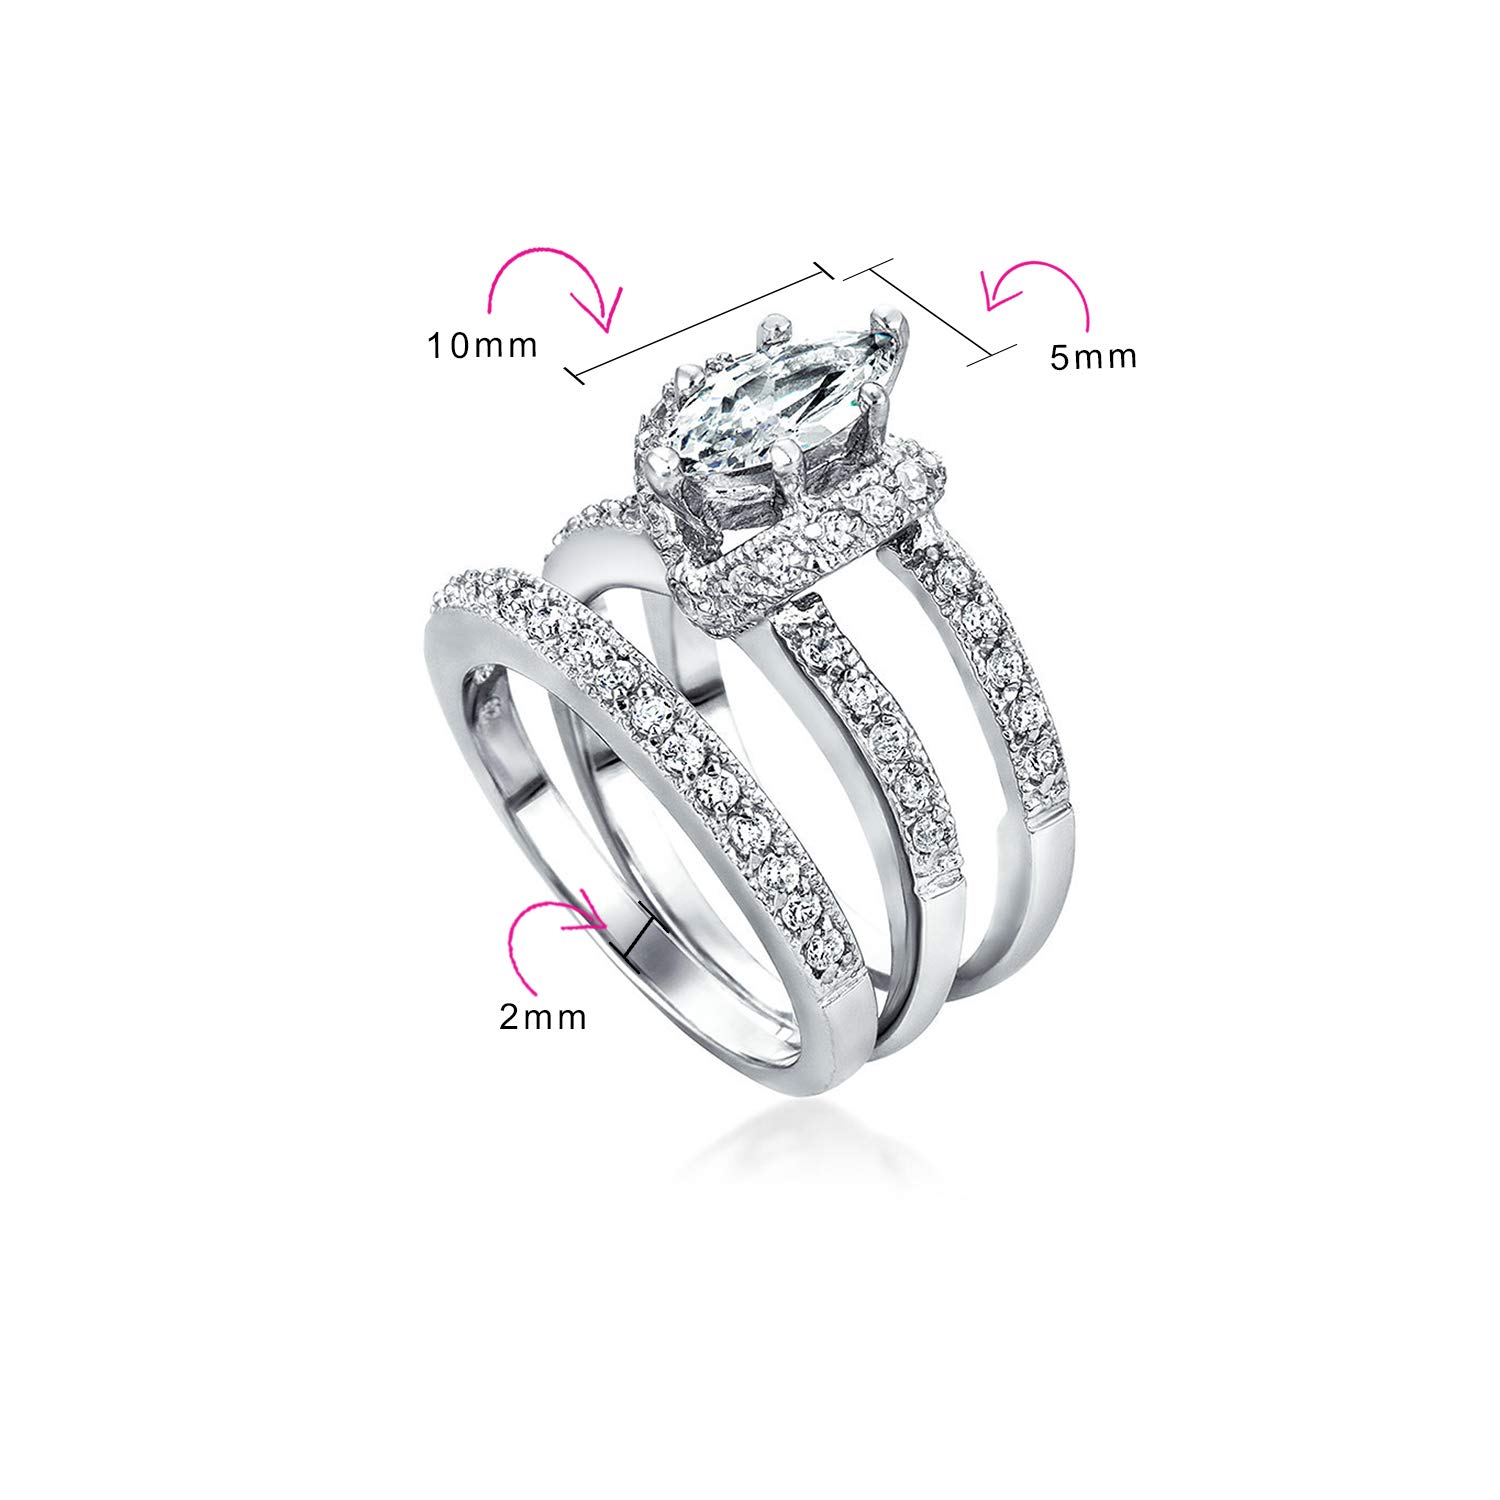 Personalize 1.5-2.5CT Cubic Zirconia Enhancer Guard Round Solitaire Halo Marquise AAA CZ Baguette Band Inset Anniversary Statement Engagement Ring Wedding Set .925 Sterling Silver Customizable